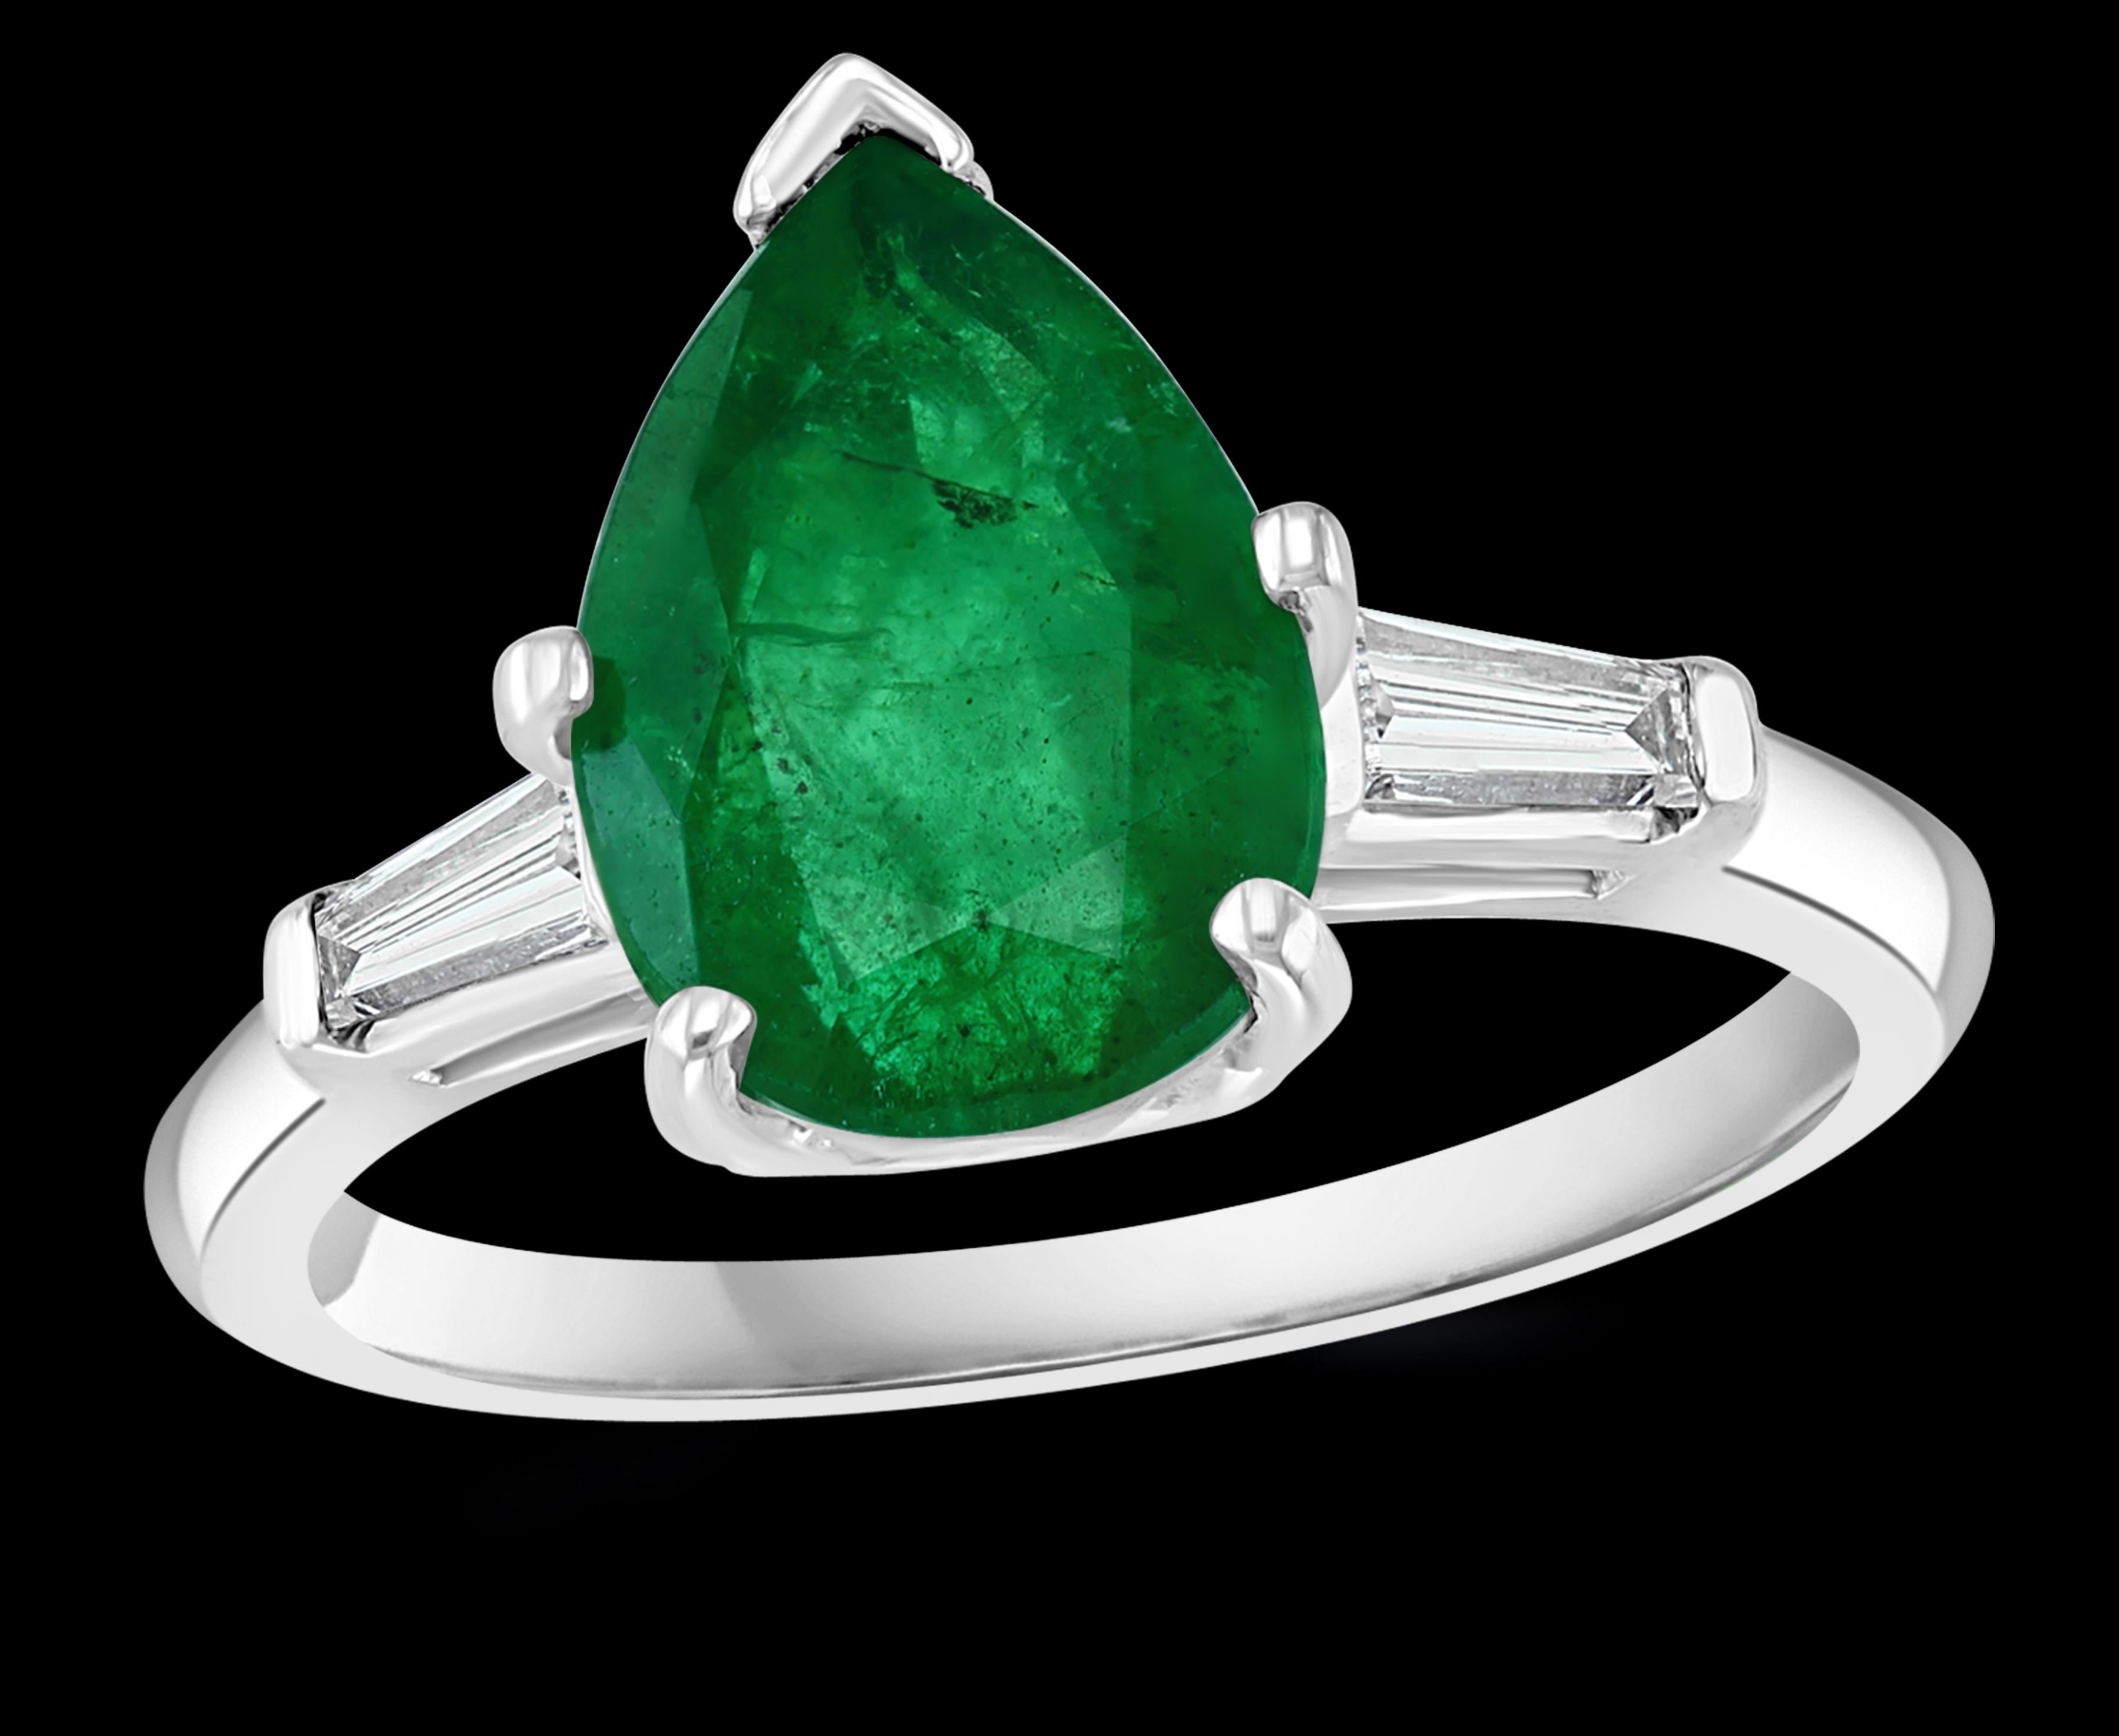 
Approximately 3.5 Carat Pear Cut  Emerald & Diamond Ring 14 Karat  White Gold Size 8
Pear shape  Emerald Ring
 Emeralds are very precious , Very Difficult to find now a days  and getting more more difficult to find for a good price
A classic,